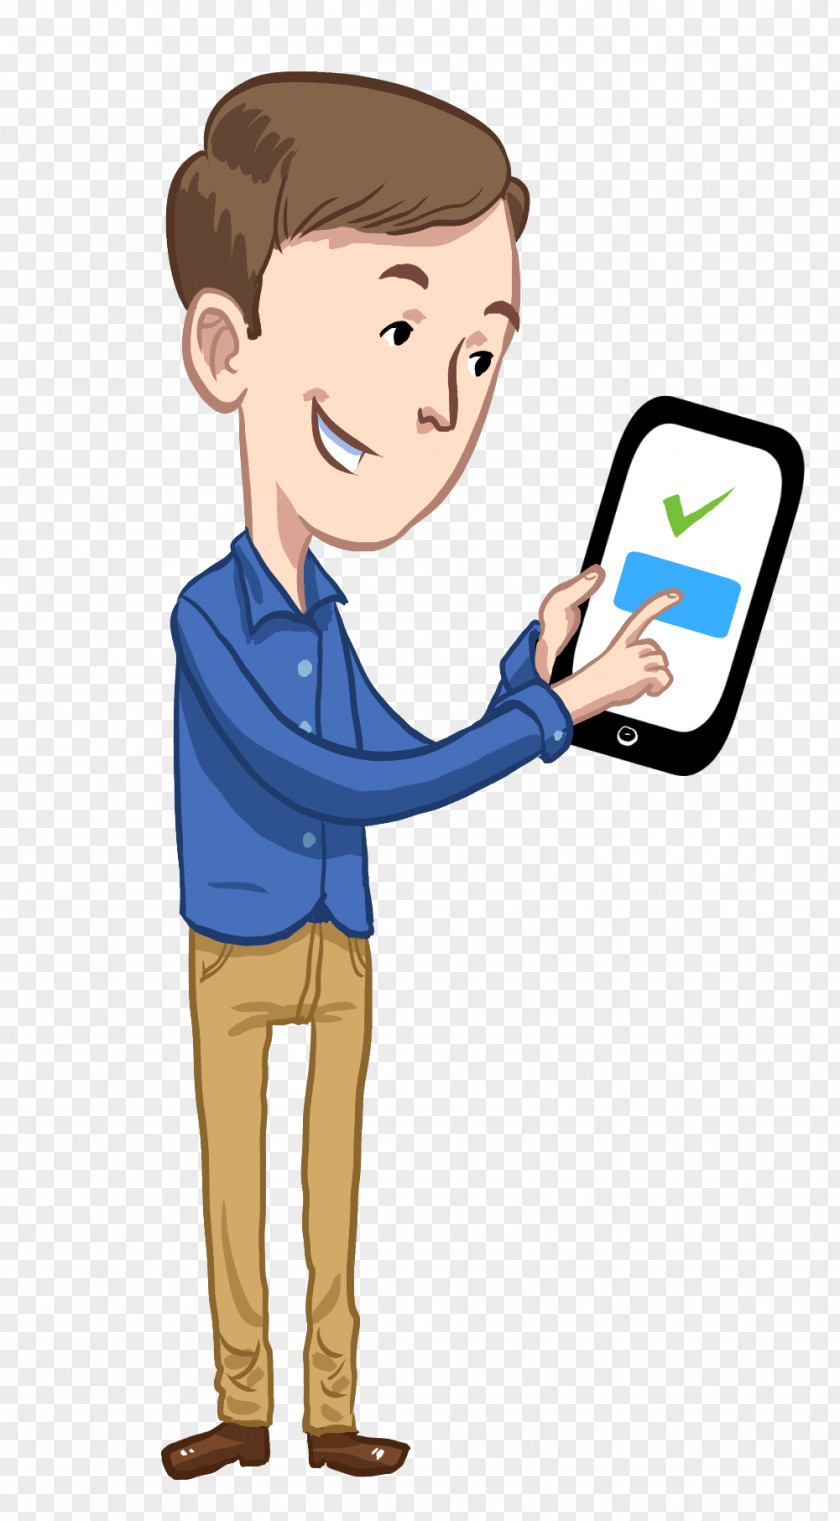 Mobile Phone Communication Device Cartoon PNG